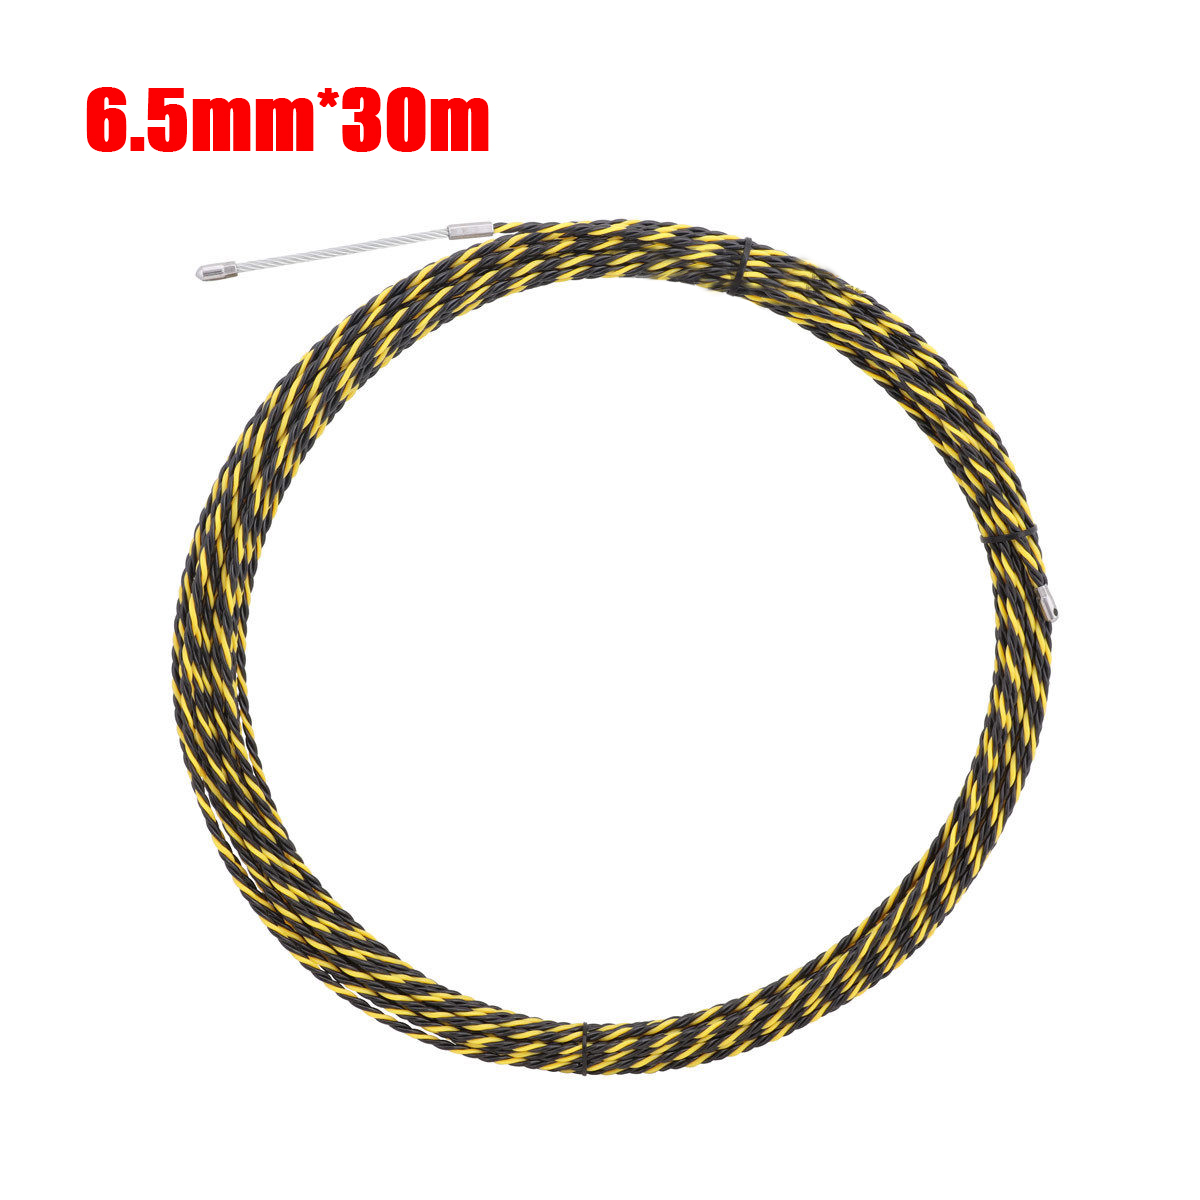 30M-65mm-Spiral-Cable-Puller-Conduit-Snake-Cable-Rodder-Fish-Tape-Wire-Guide-1300193-1